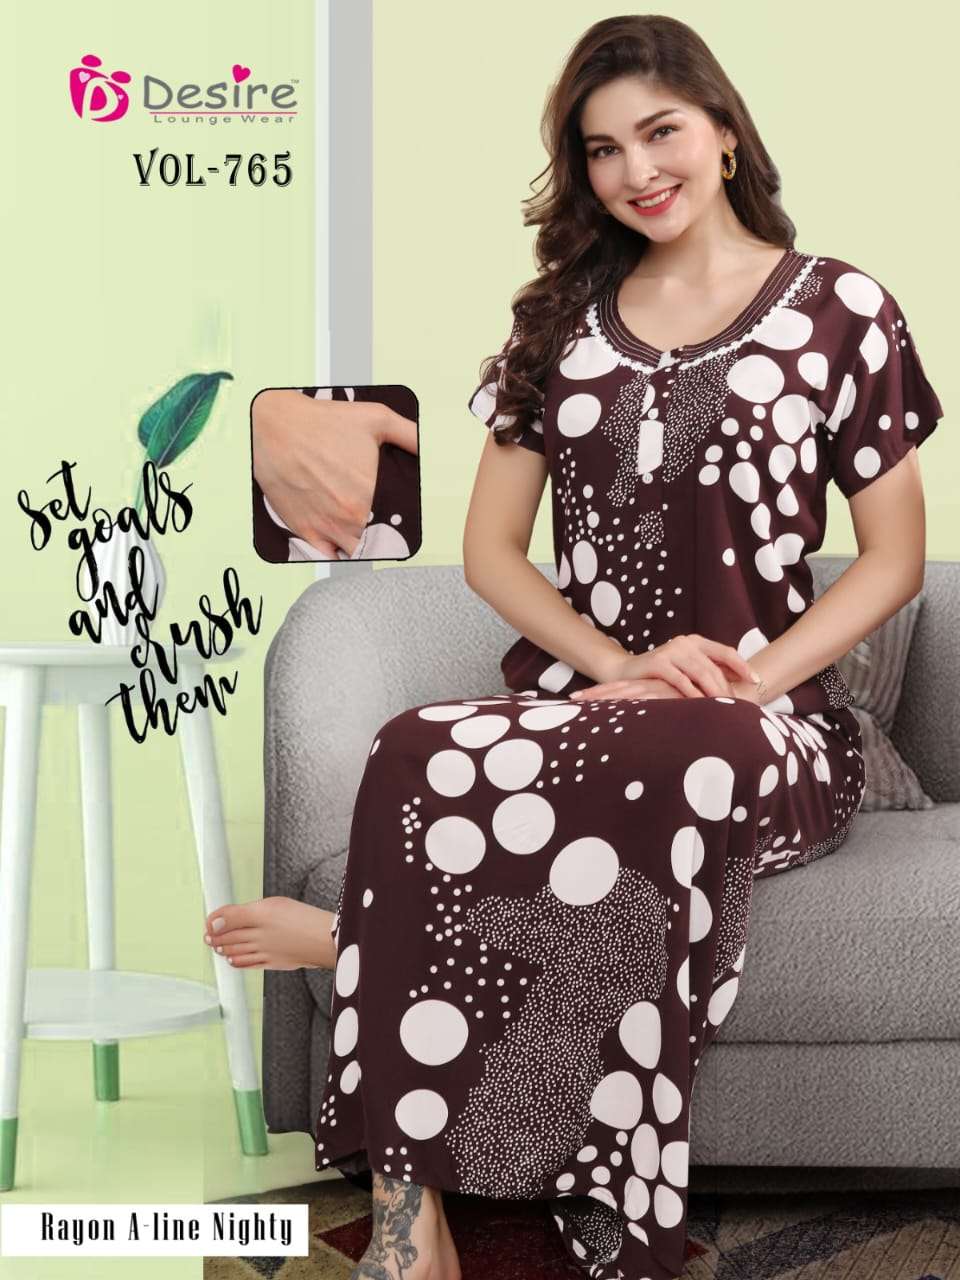 new launch desire premium rayon a line printed nighty heavy quality rayon fabric free size up to xxl nighty gown lounge wear nightdress gown for women